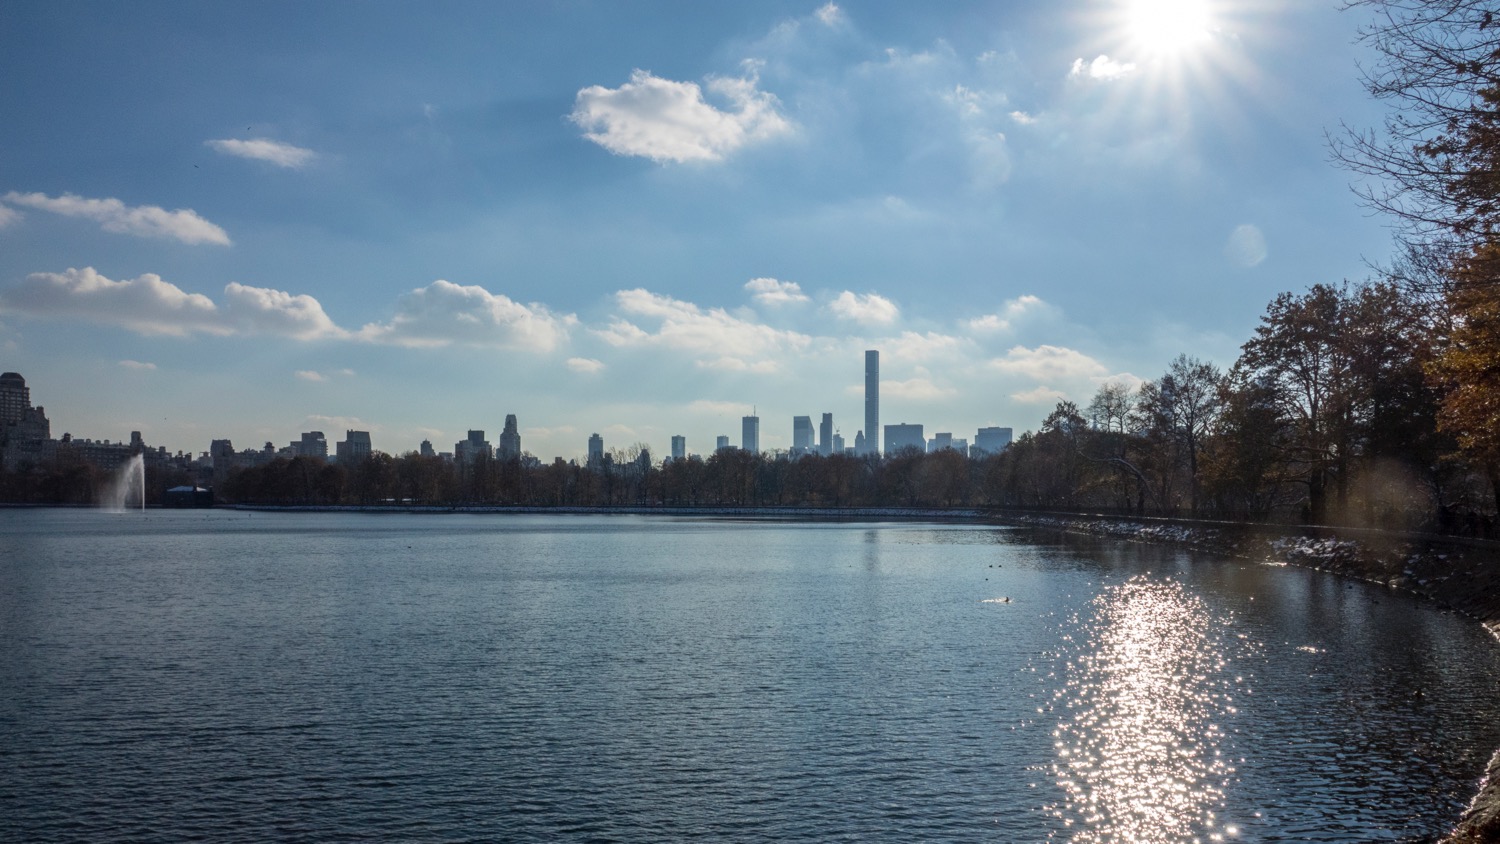  We entered the park close to the Jacqueline Kennedy Onassis Reservoir. 